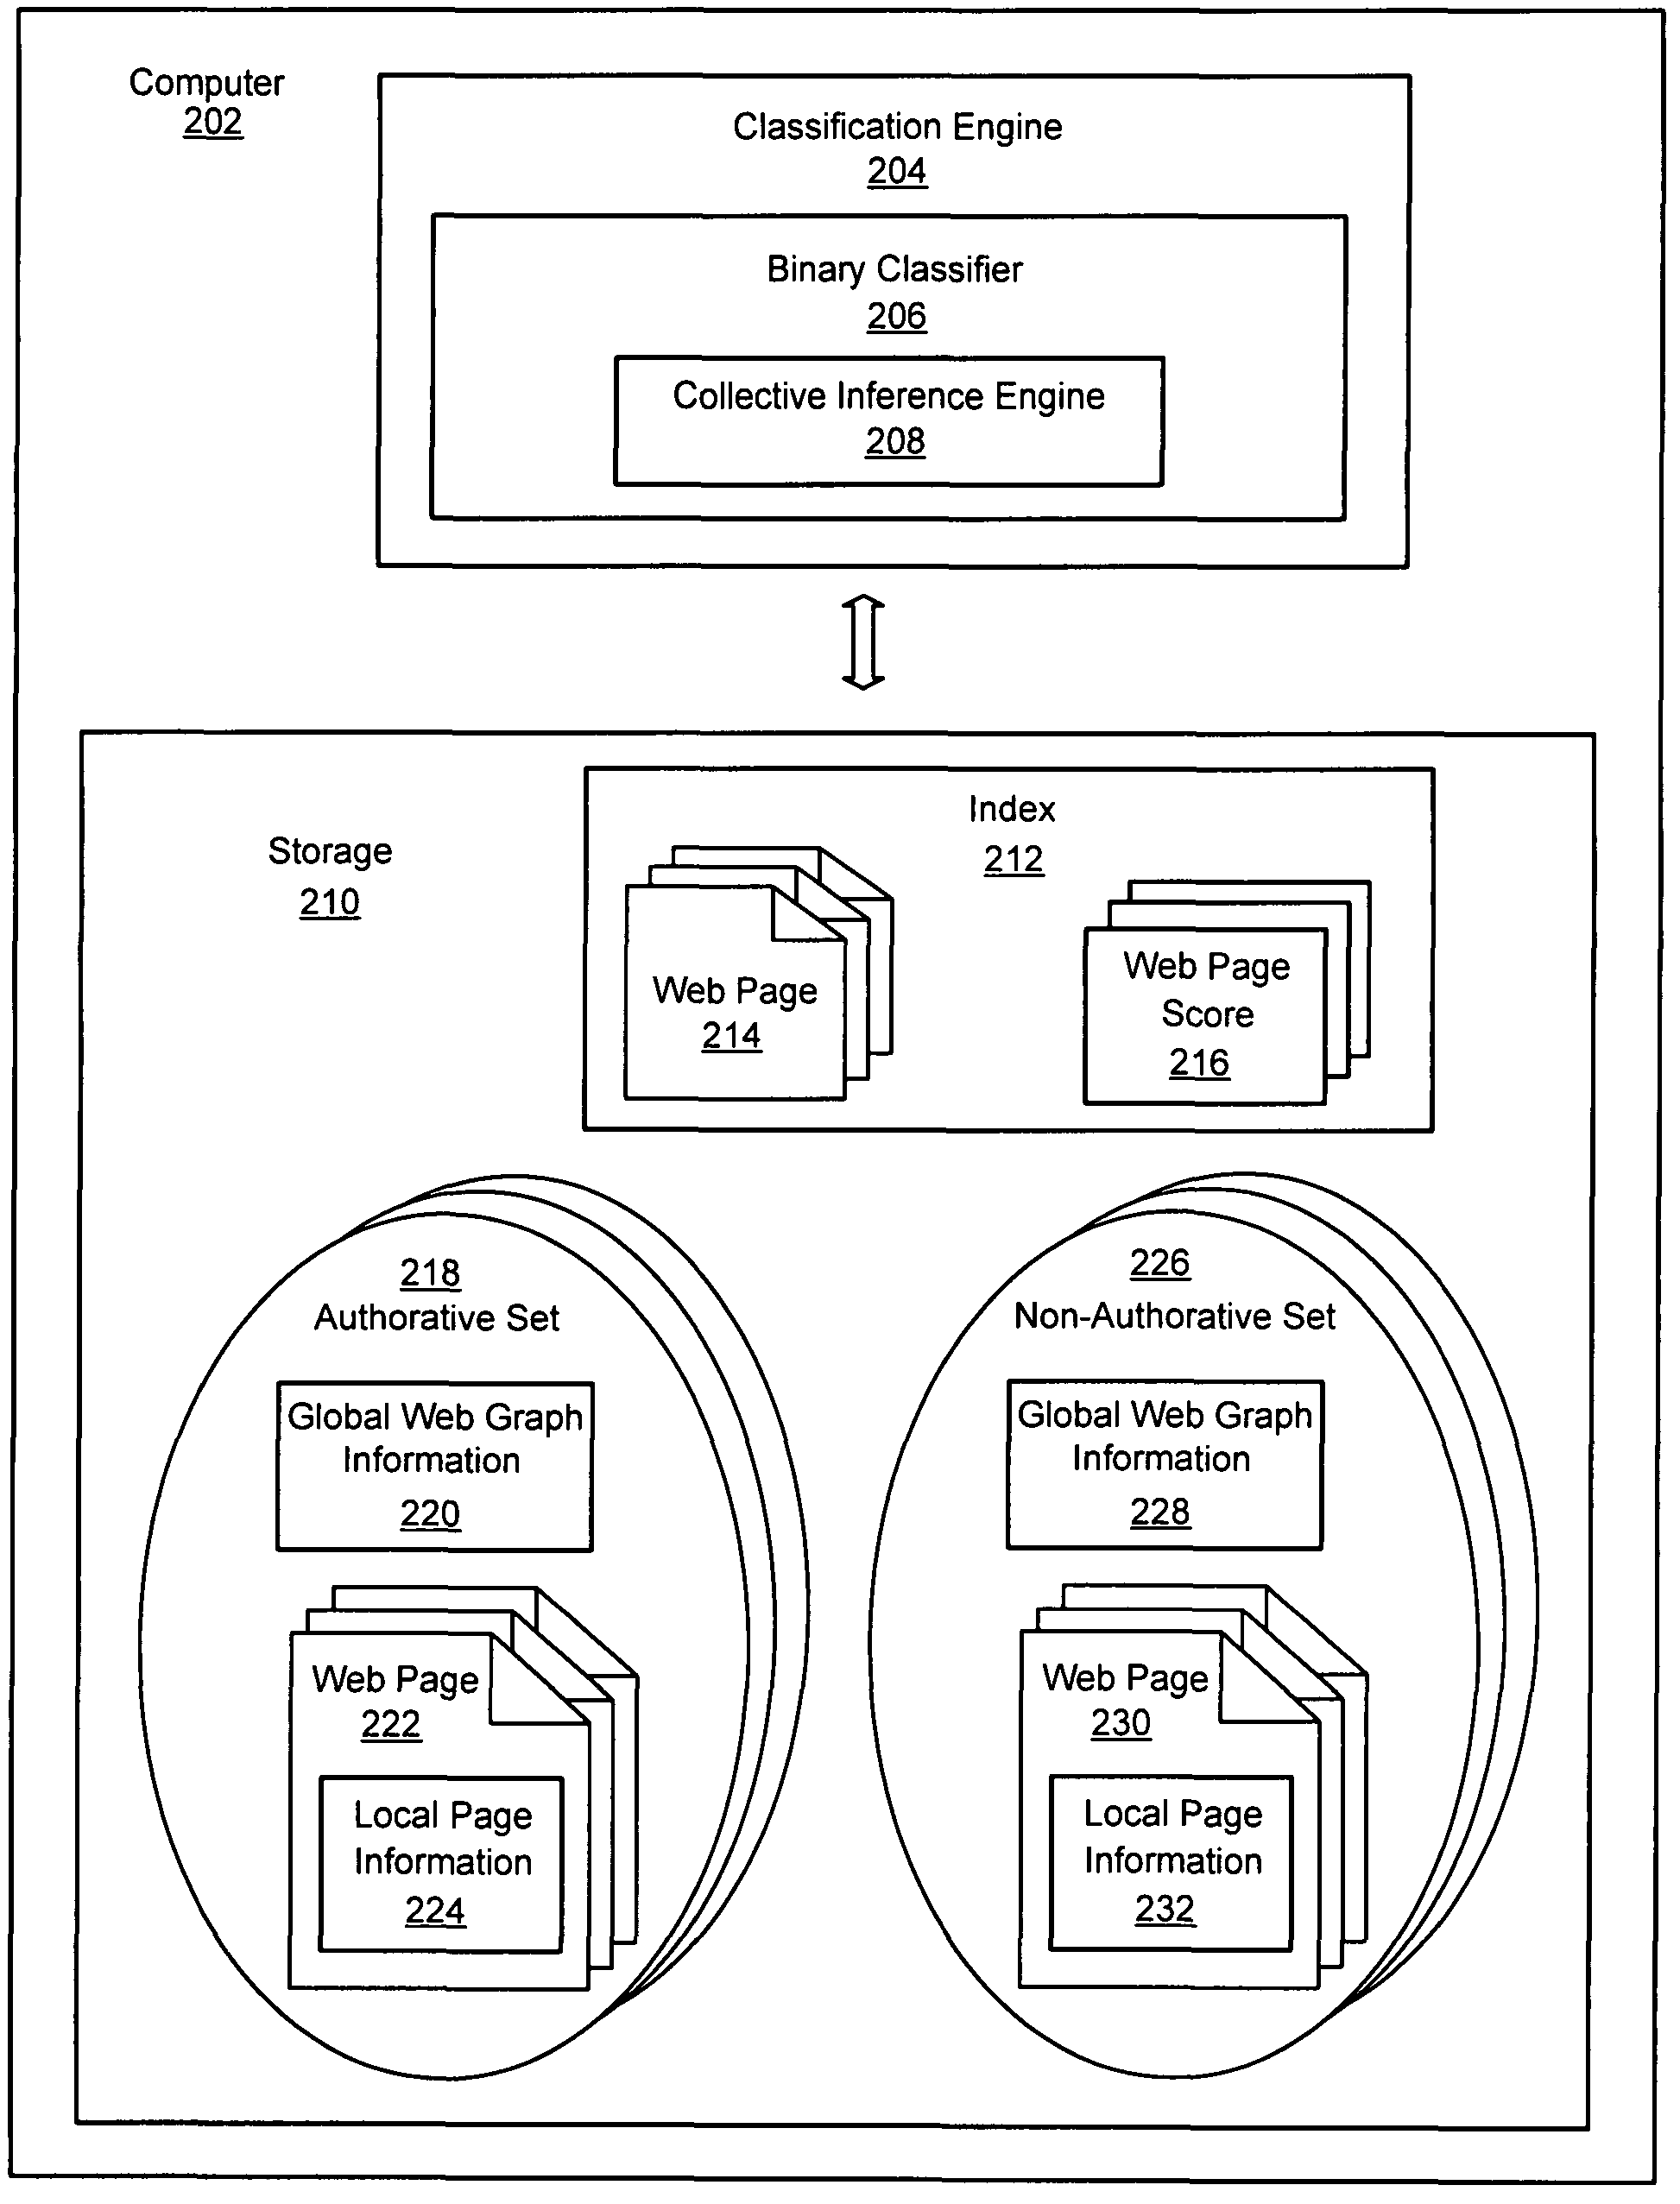 System and method for determining web page quality using collective inference based on local and global information